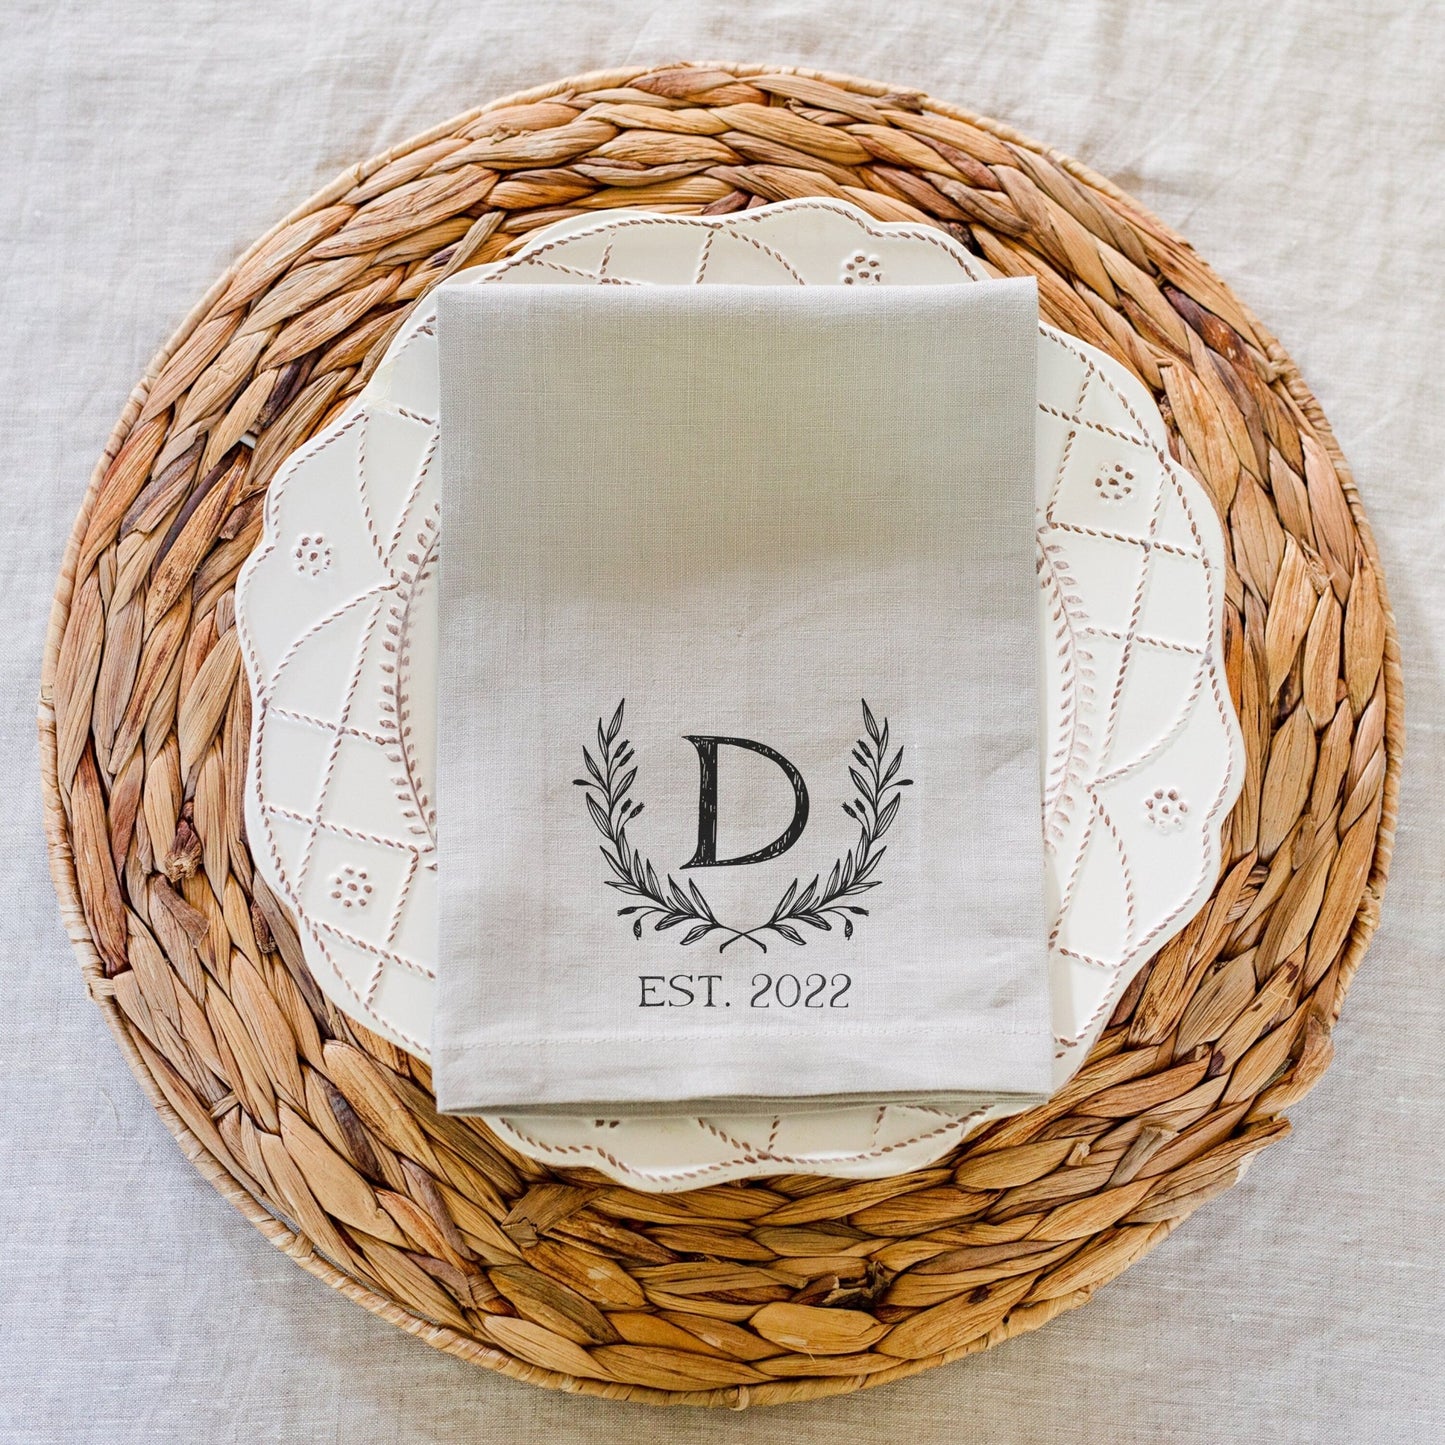 Load image into Gallery viewer, Family Initial Established Date 100% Linen Napkin Set of 2 | Wedding Gift | Housewarming Gift | Cloth Napkins | Eco-Friendly Napkins
